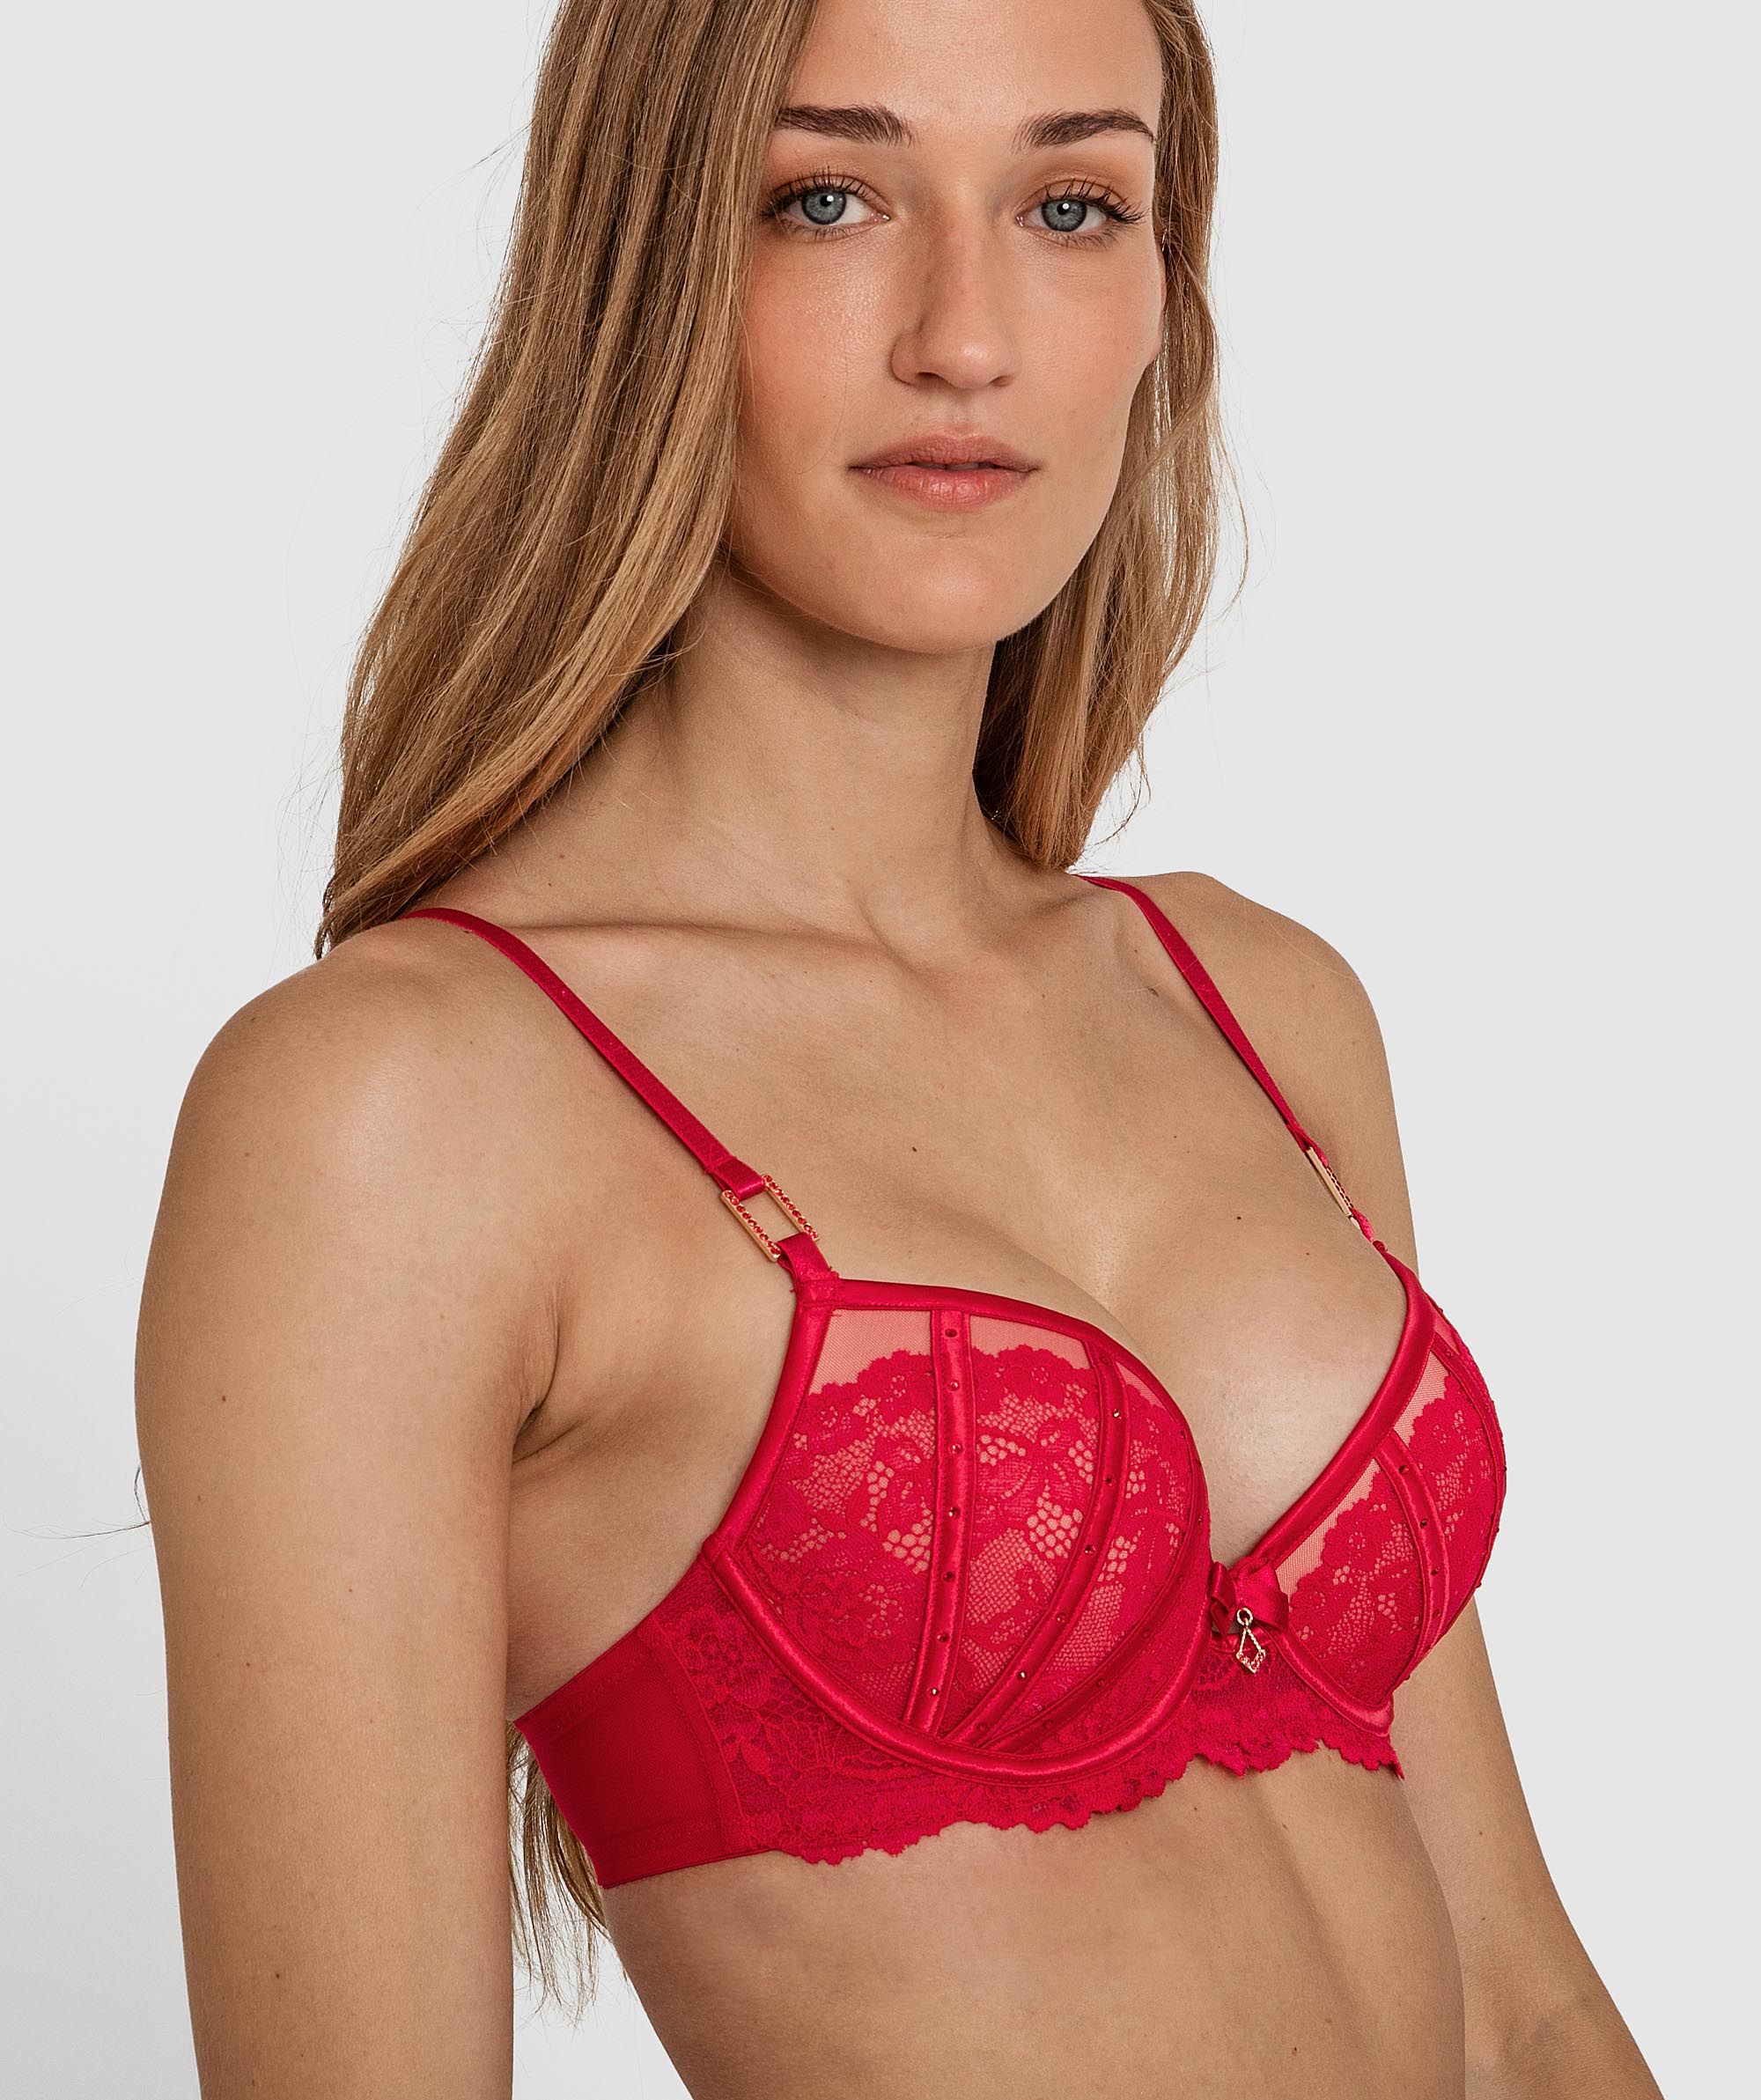 Bras N Things Bethany Sparkle Push Up Bra - Red